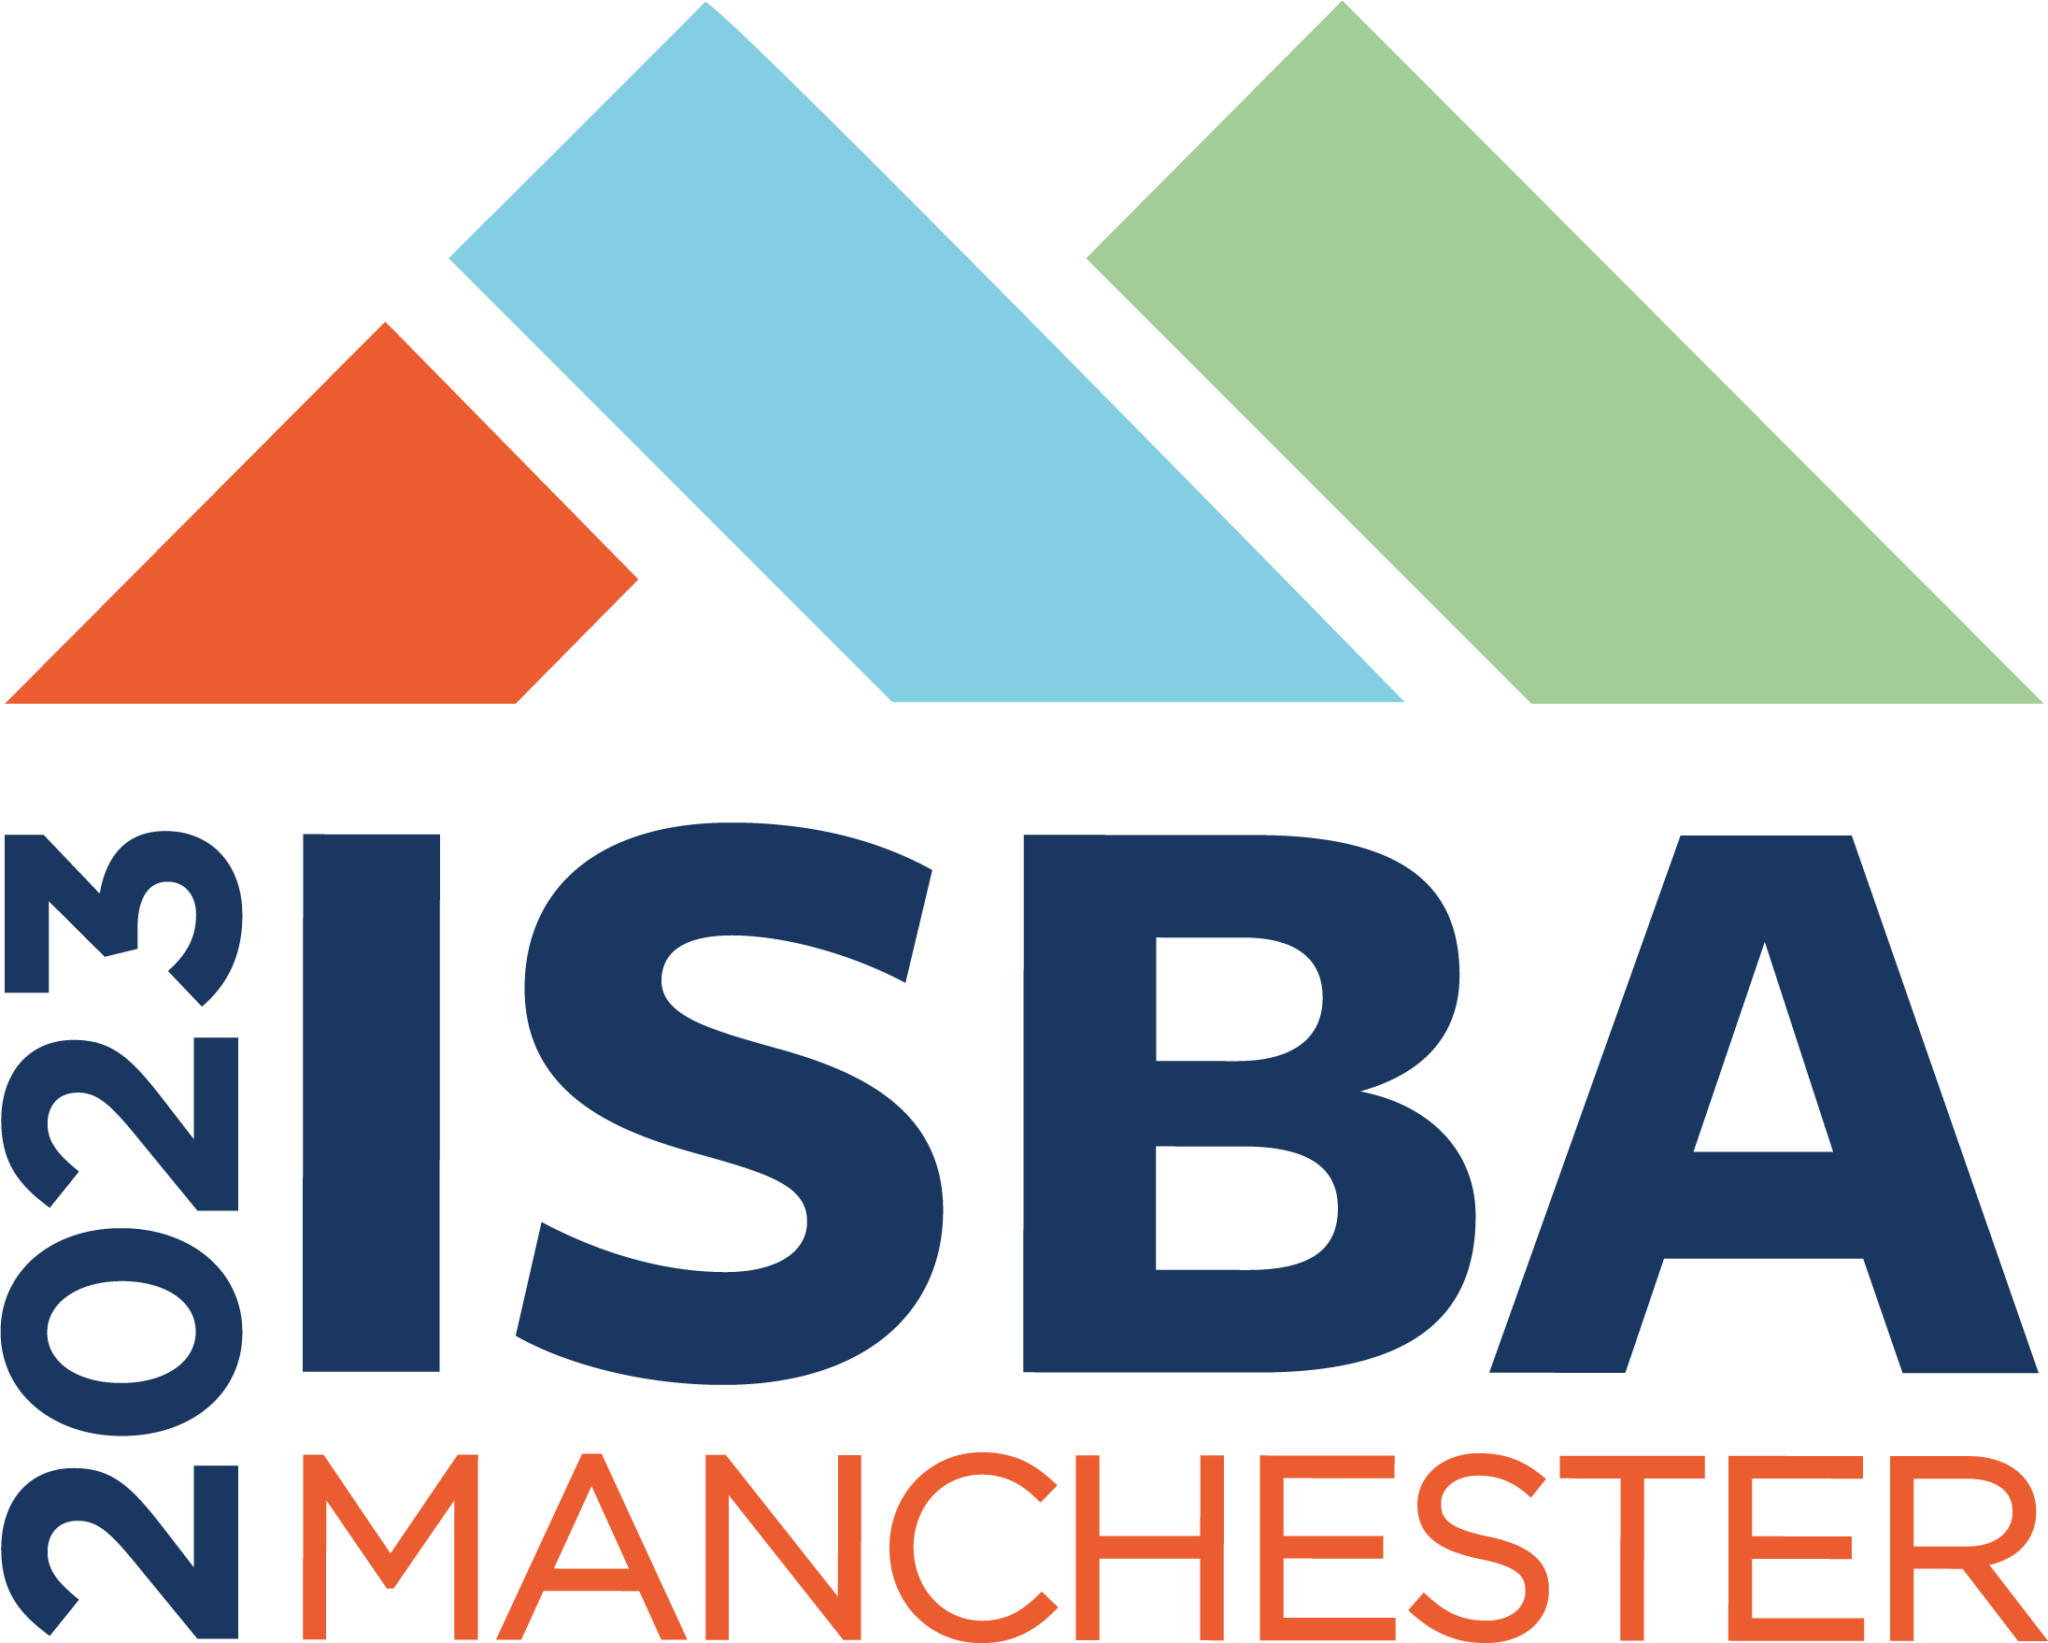 Meet us at the ISBA Annual Conference this May